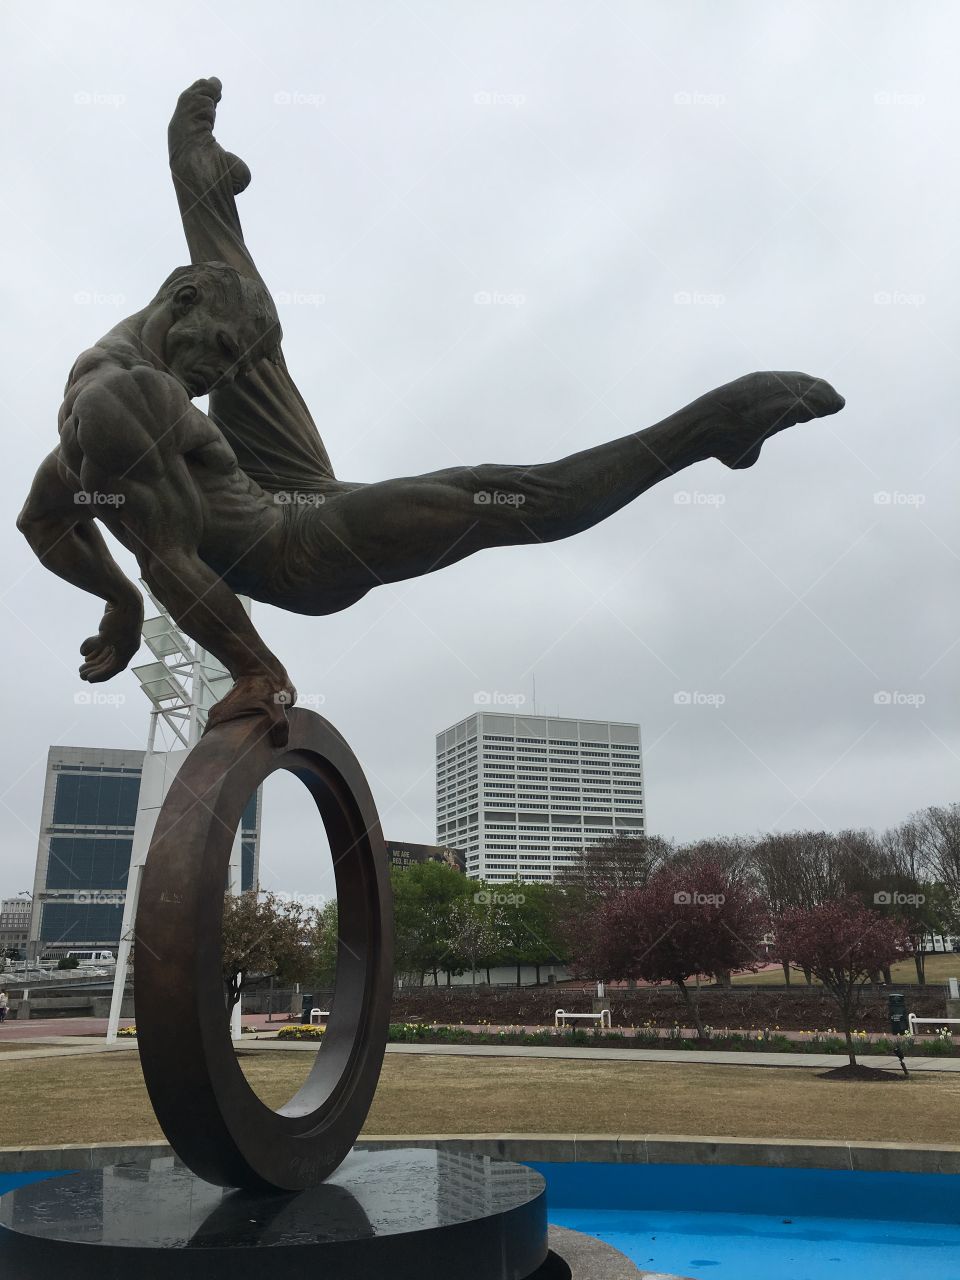 “The Flair” by Pierce Rice donated to the city of Atlanta 